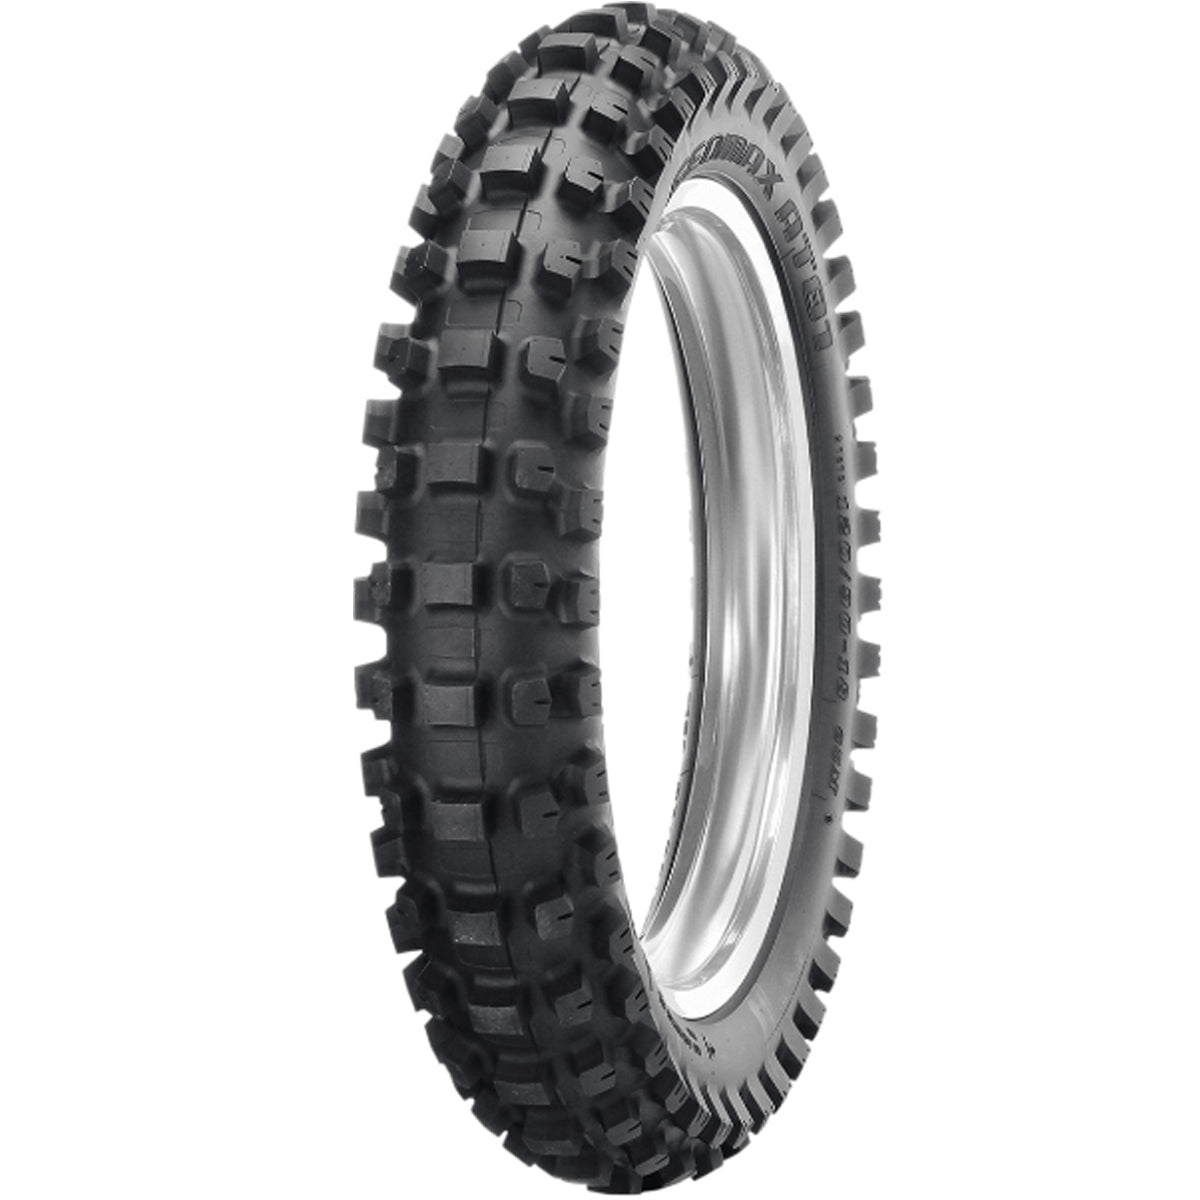 Dunlop Geomax AT81 RC 18" Rear Off-Road Tires-0313